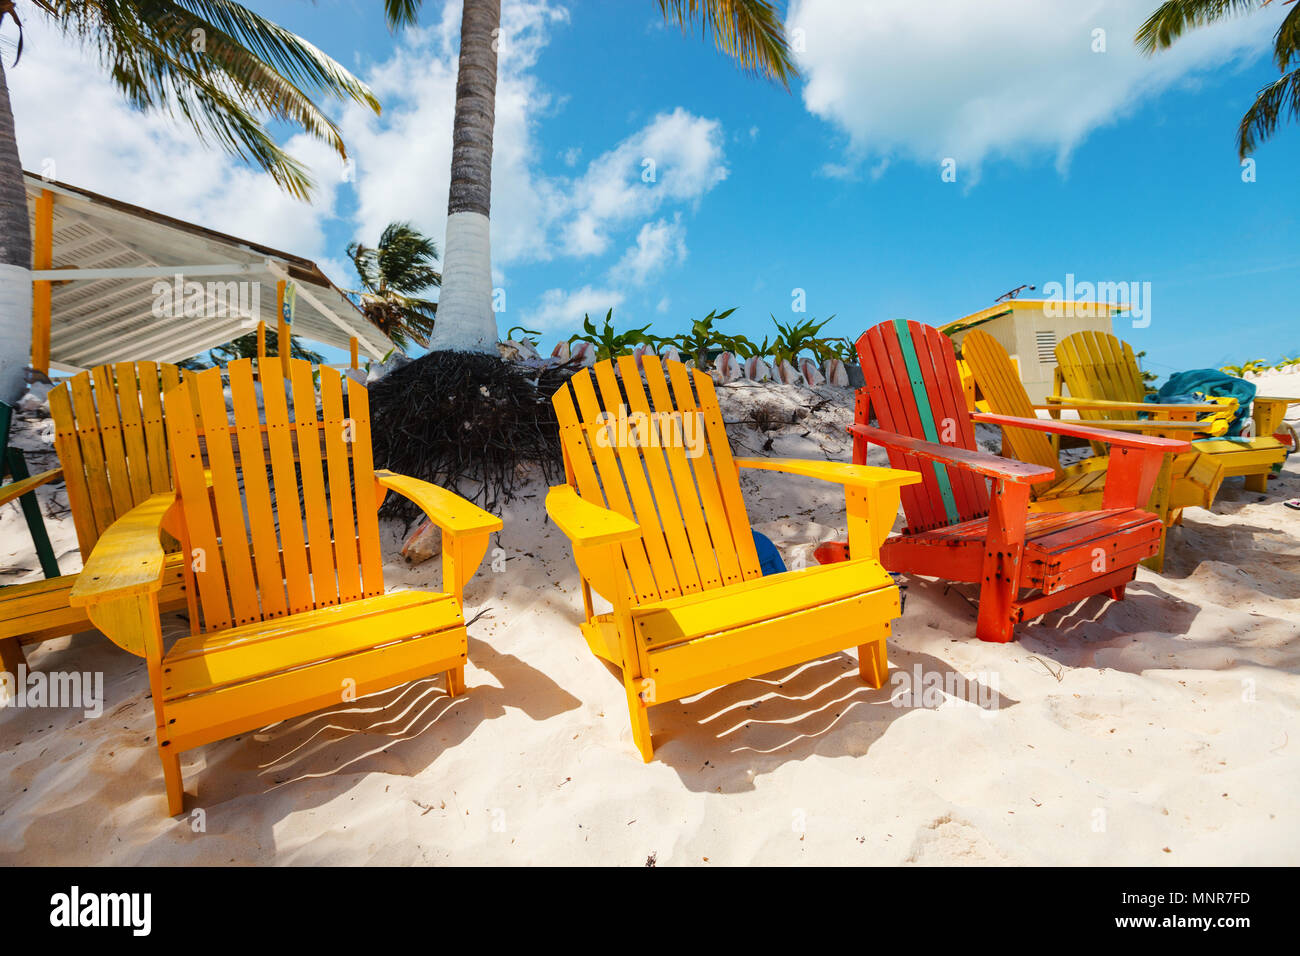 Colorful adirondack yellow and orange lounge chairs at tropical beach in Caribbean with beautiful turquoise ocean water, white sand and blue sky Stock Photo